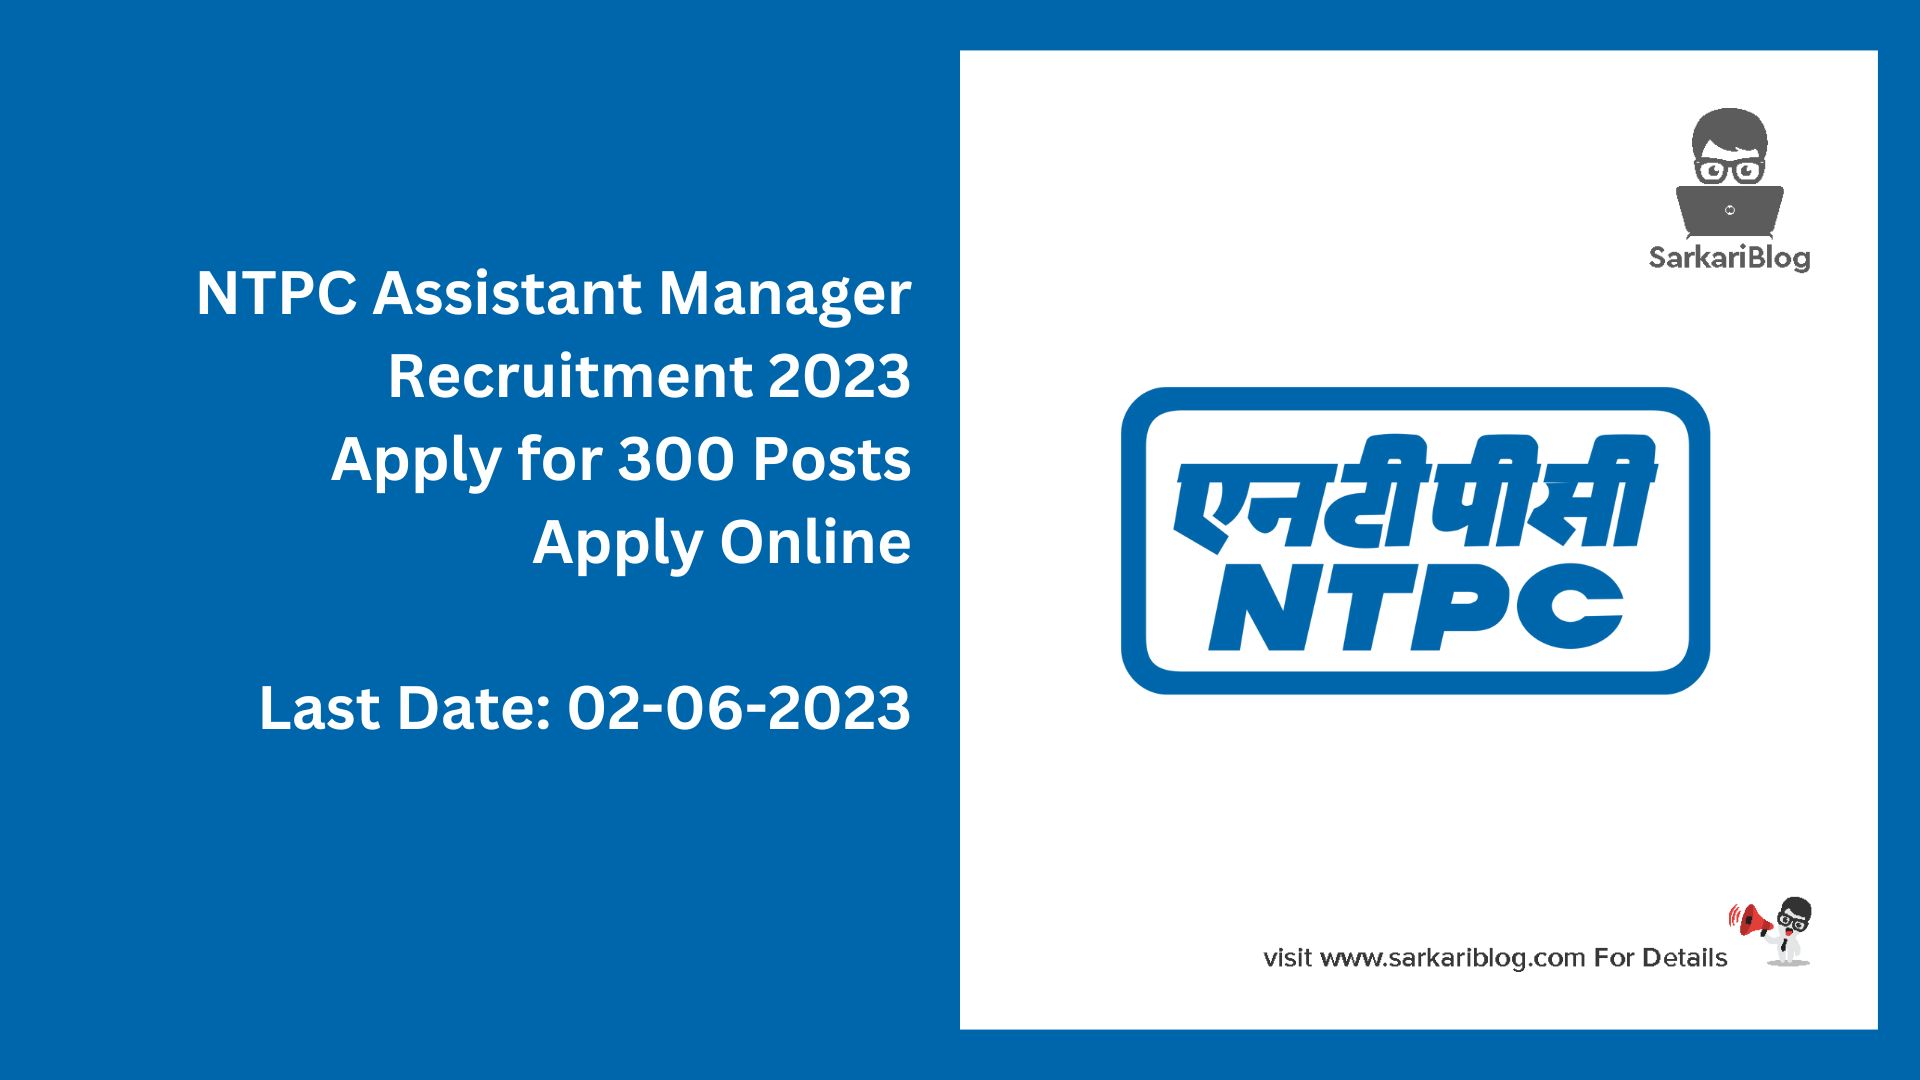 NTPC Assistant Manager Recruitment 2023